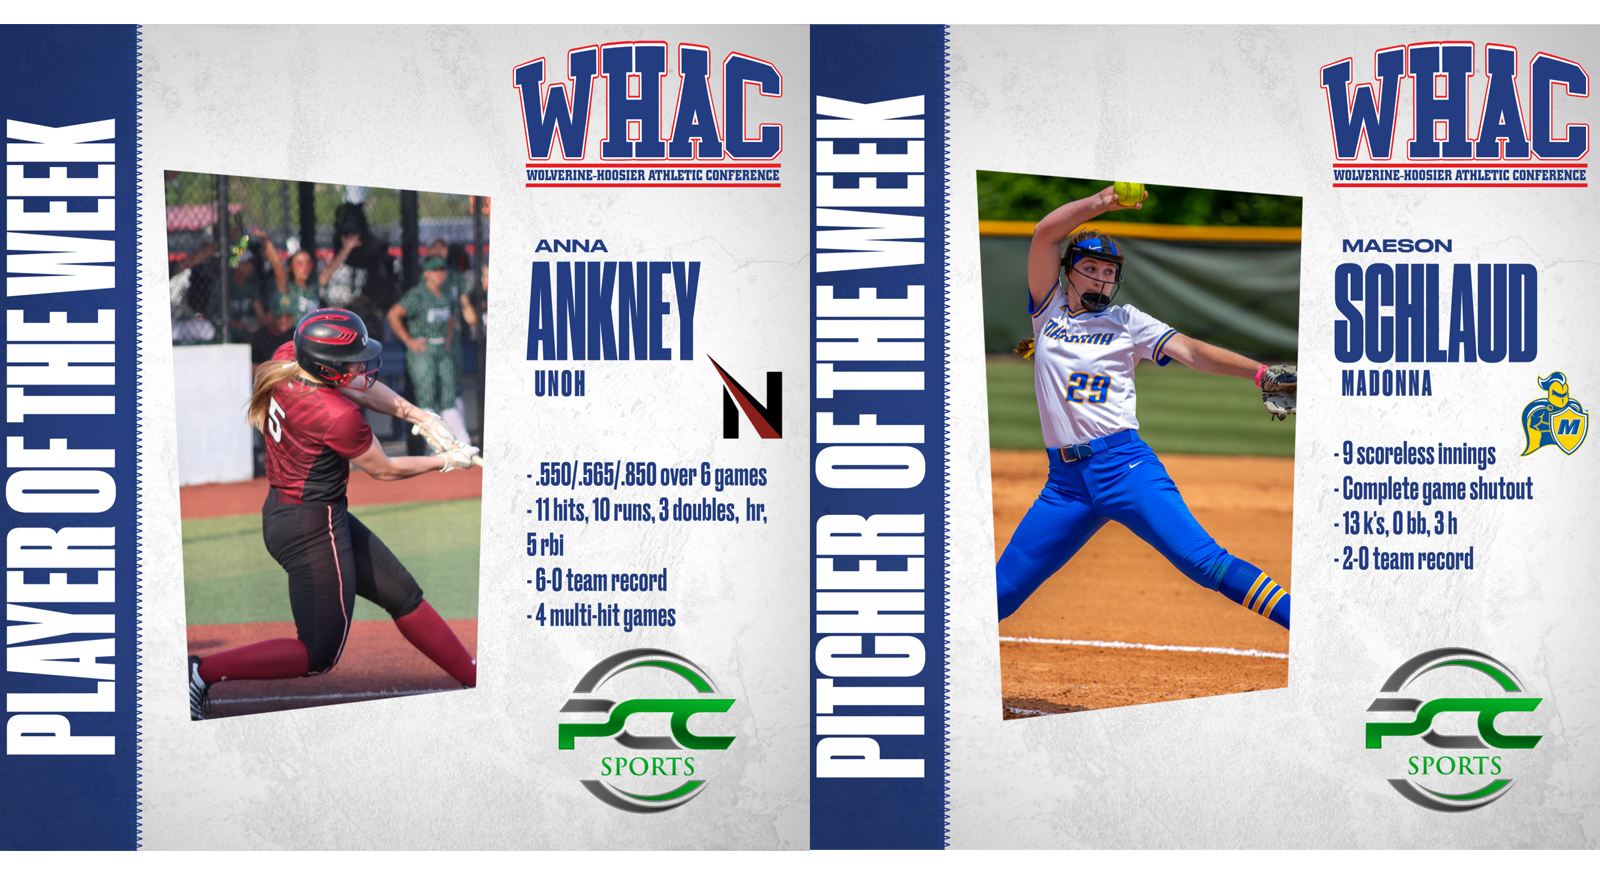 Schlaud and Ankney Earn Player of the Week Honors